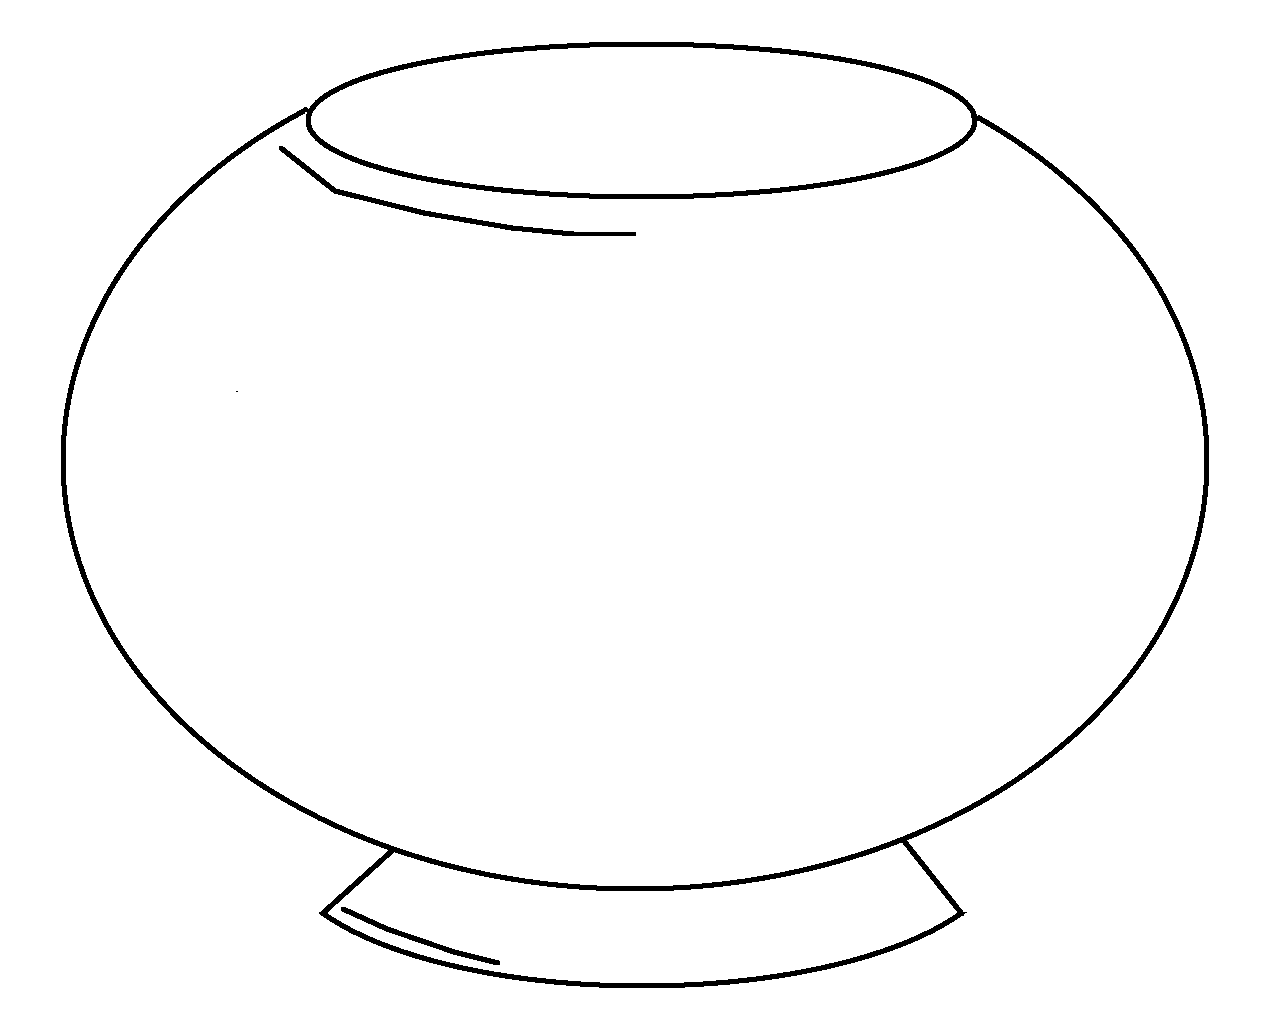 Fish bowl clipart black and white free 2